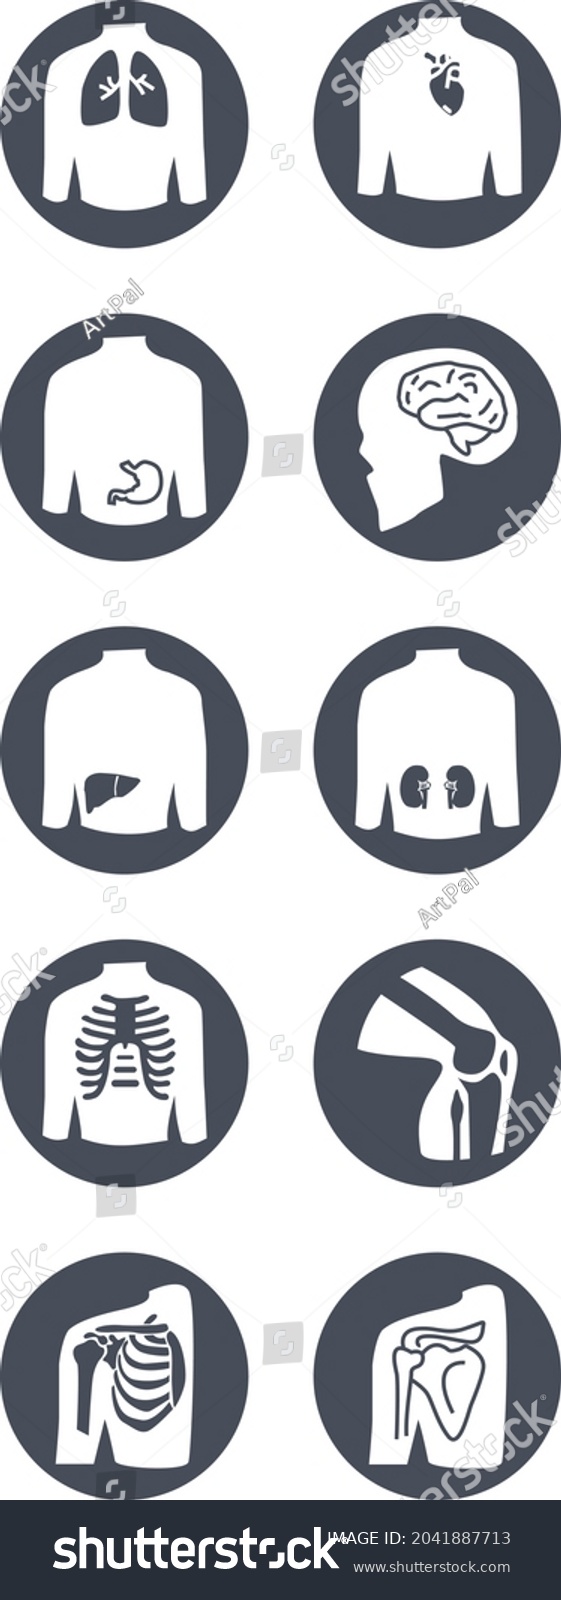 SVG of Human organs vector icons pack, anatomy svg icons  svg